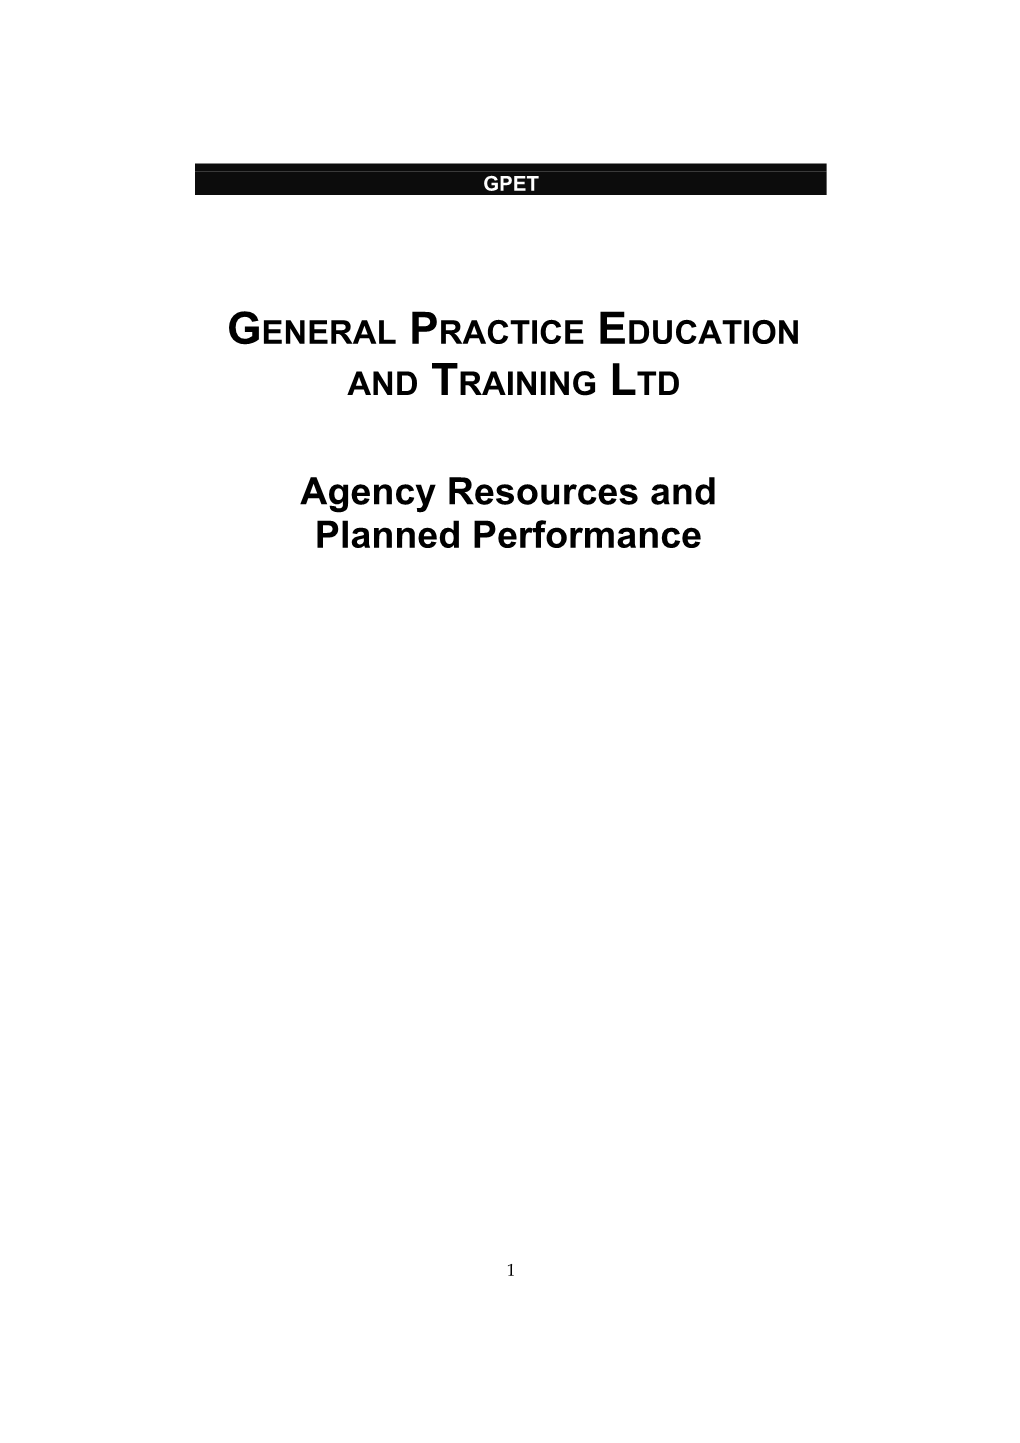 GENERAL PRACTICE EDUCATION and TRAINING LTD Agency Resources and Planned Performance